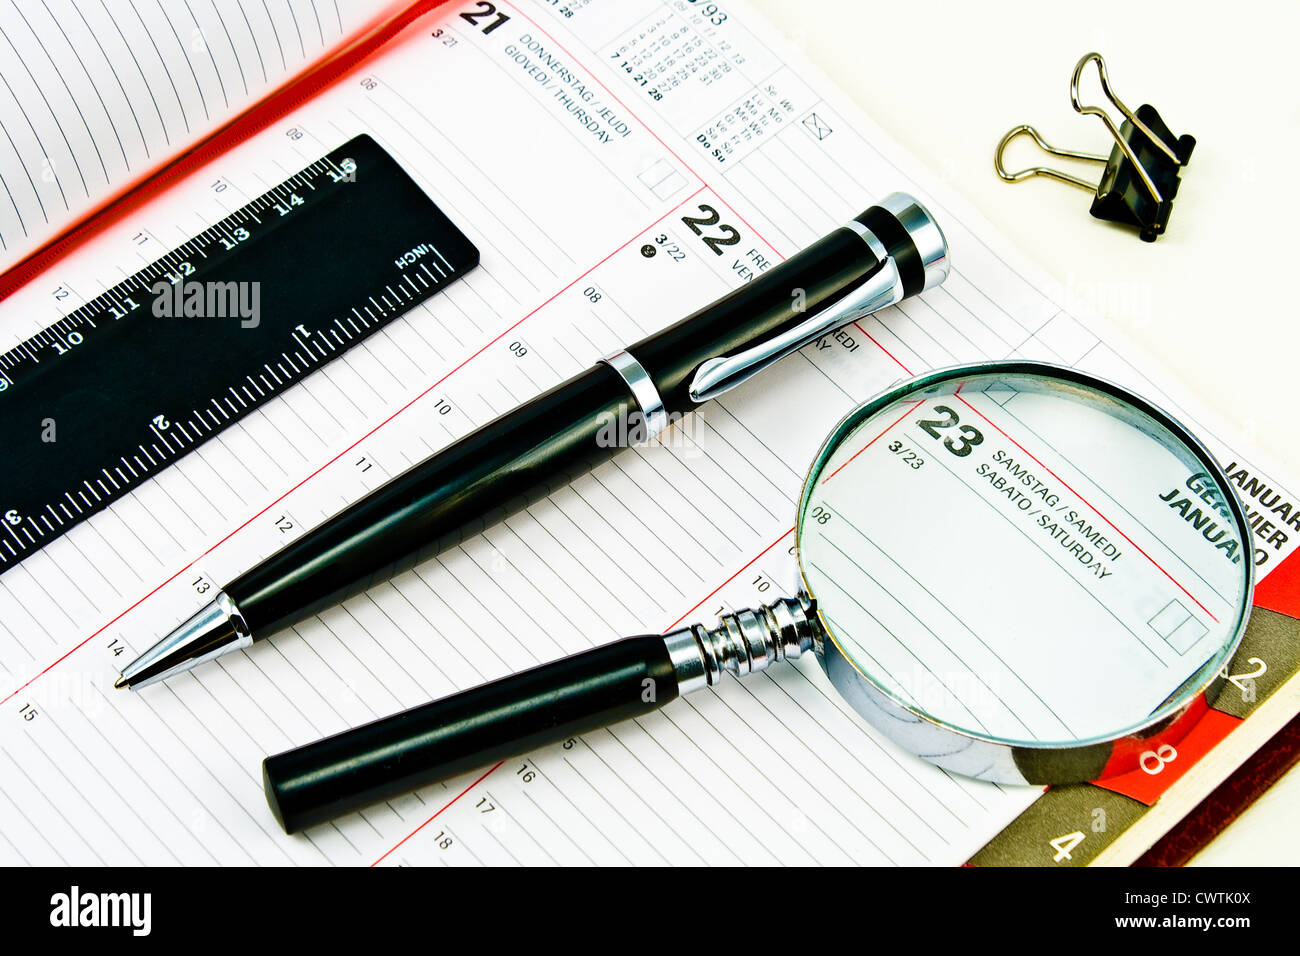 Pen and Agenda with a various tools of punctuality Stock Photo